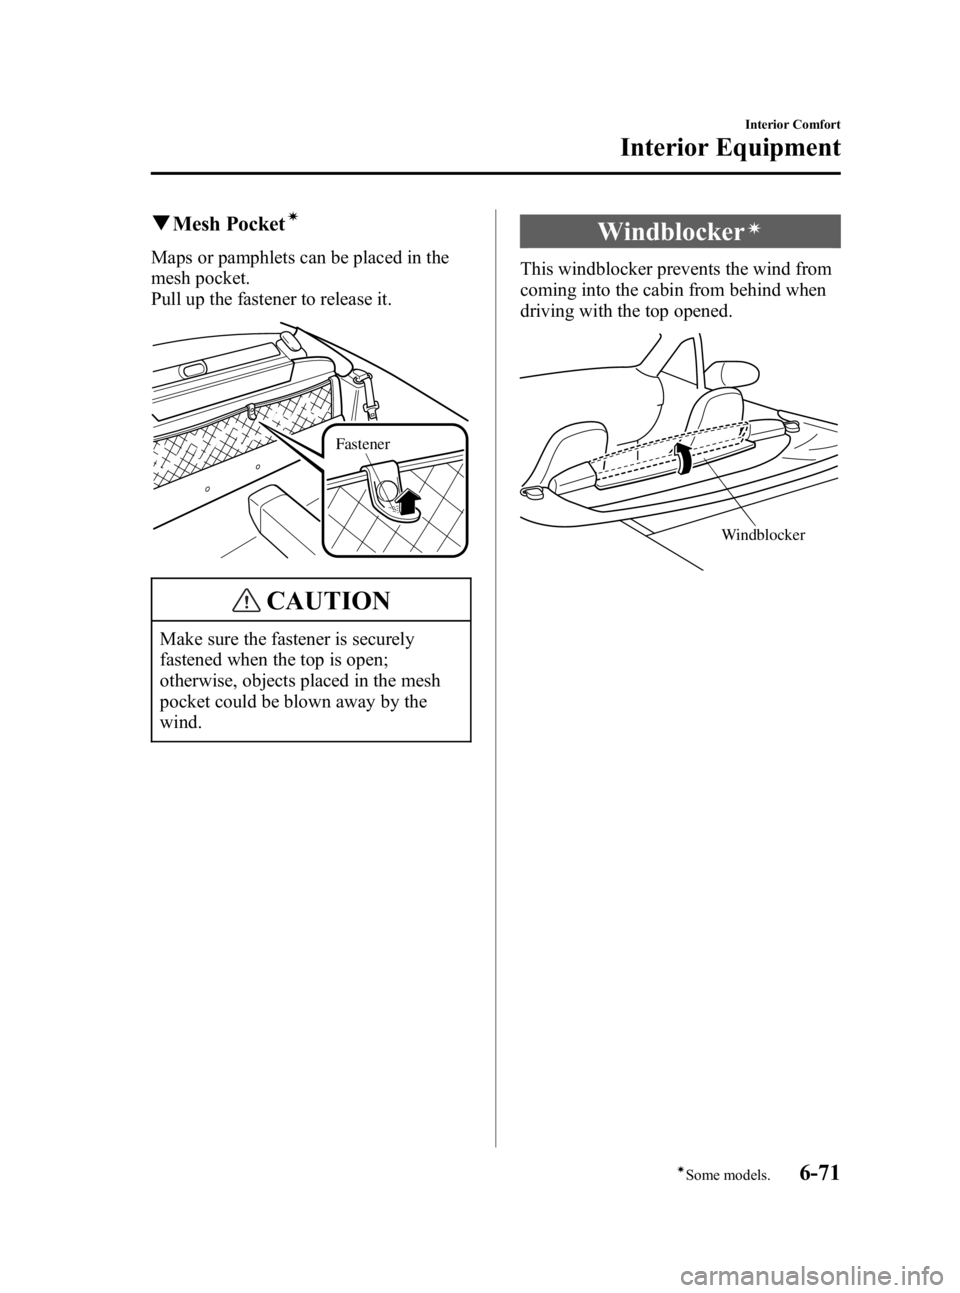 MAZDA MODEL SPEED MX-5 MIATA 2005  Owners Manual Black plate (197,1)
qMesh Pocketí
Maps or pamphlets can be placed in the
mesh pocket.
Pull up the fastener to release it.
Fastener
CAUTION
Make sure the fastener is securely
fastened when the top is 